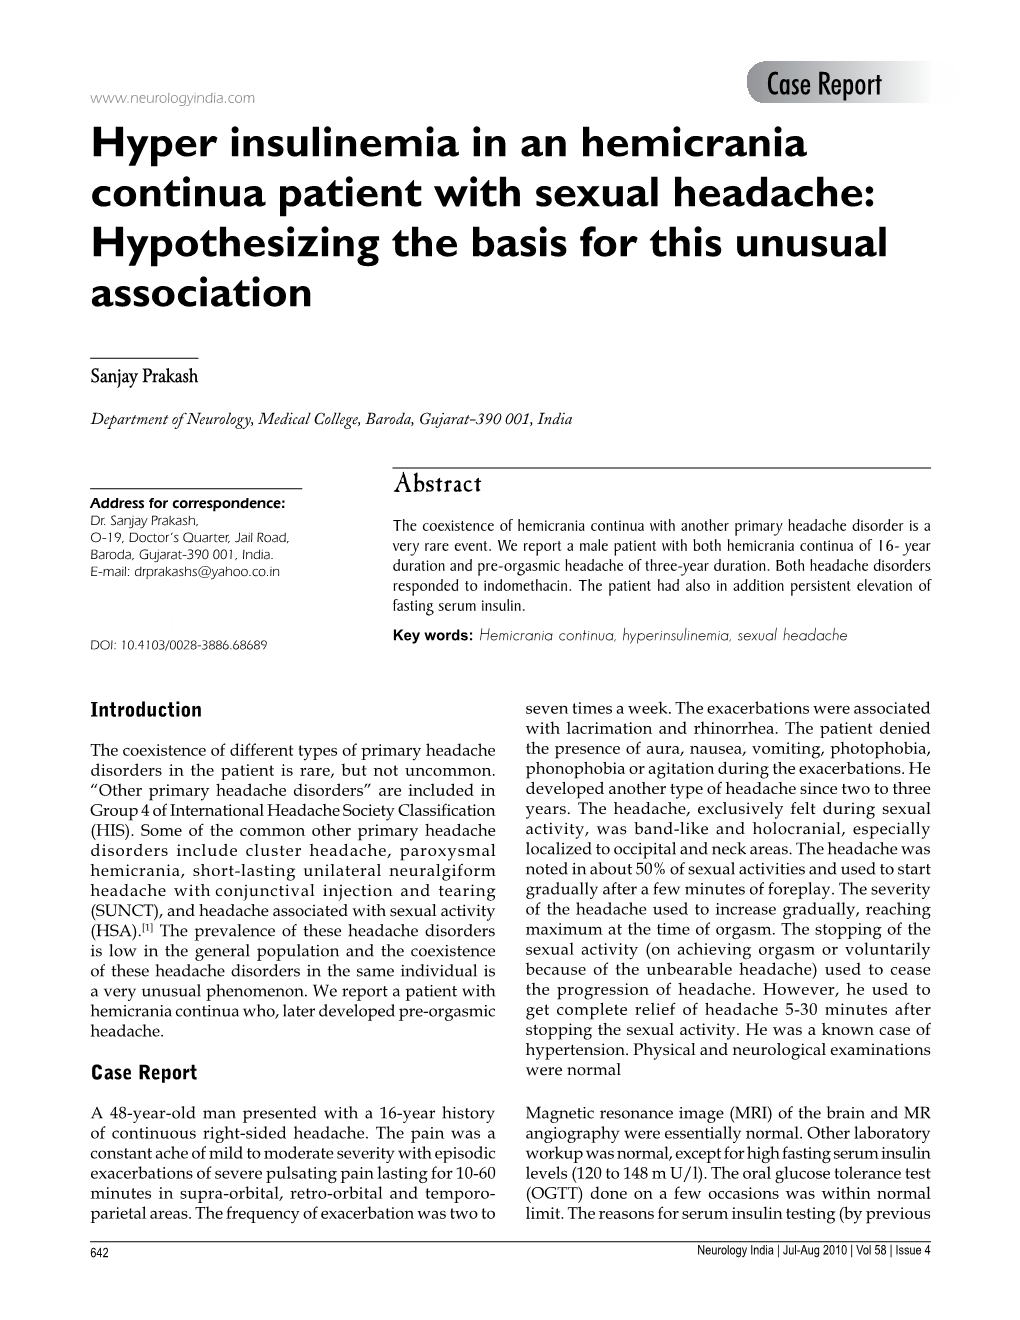 Hyper Insulinemia in an Hemicrania Continua Patient with Sexual Headache: Hypothesizing the Basis for This Unusual Association